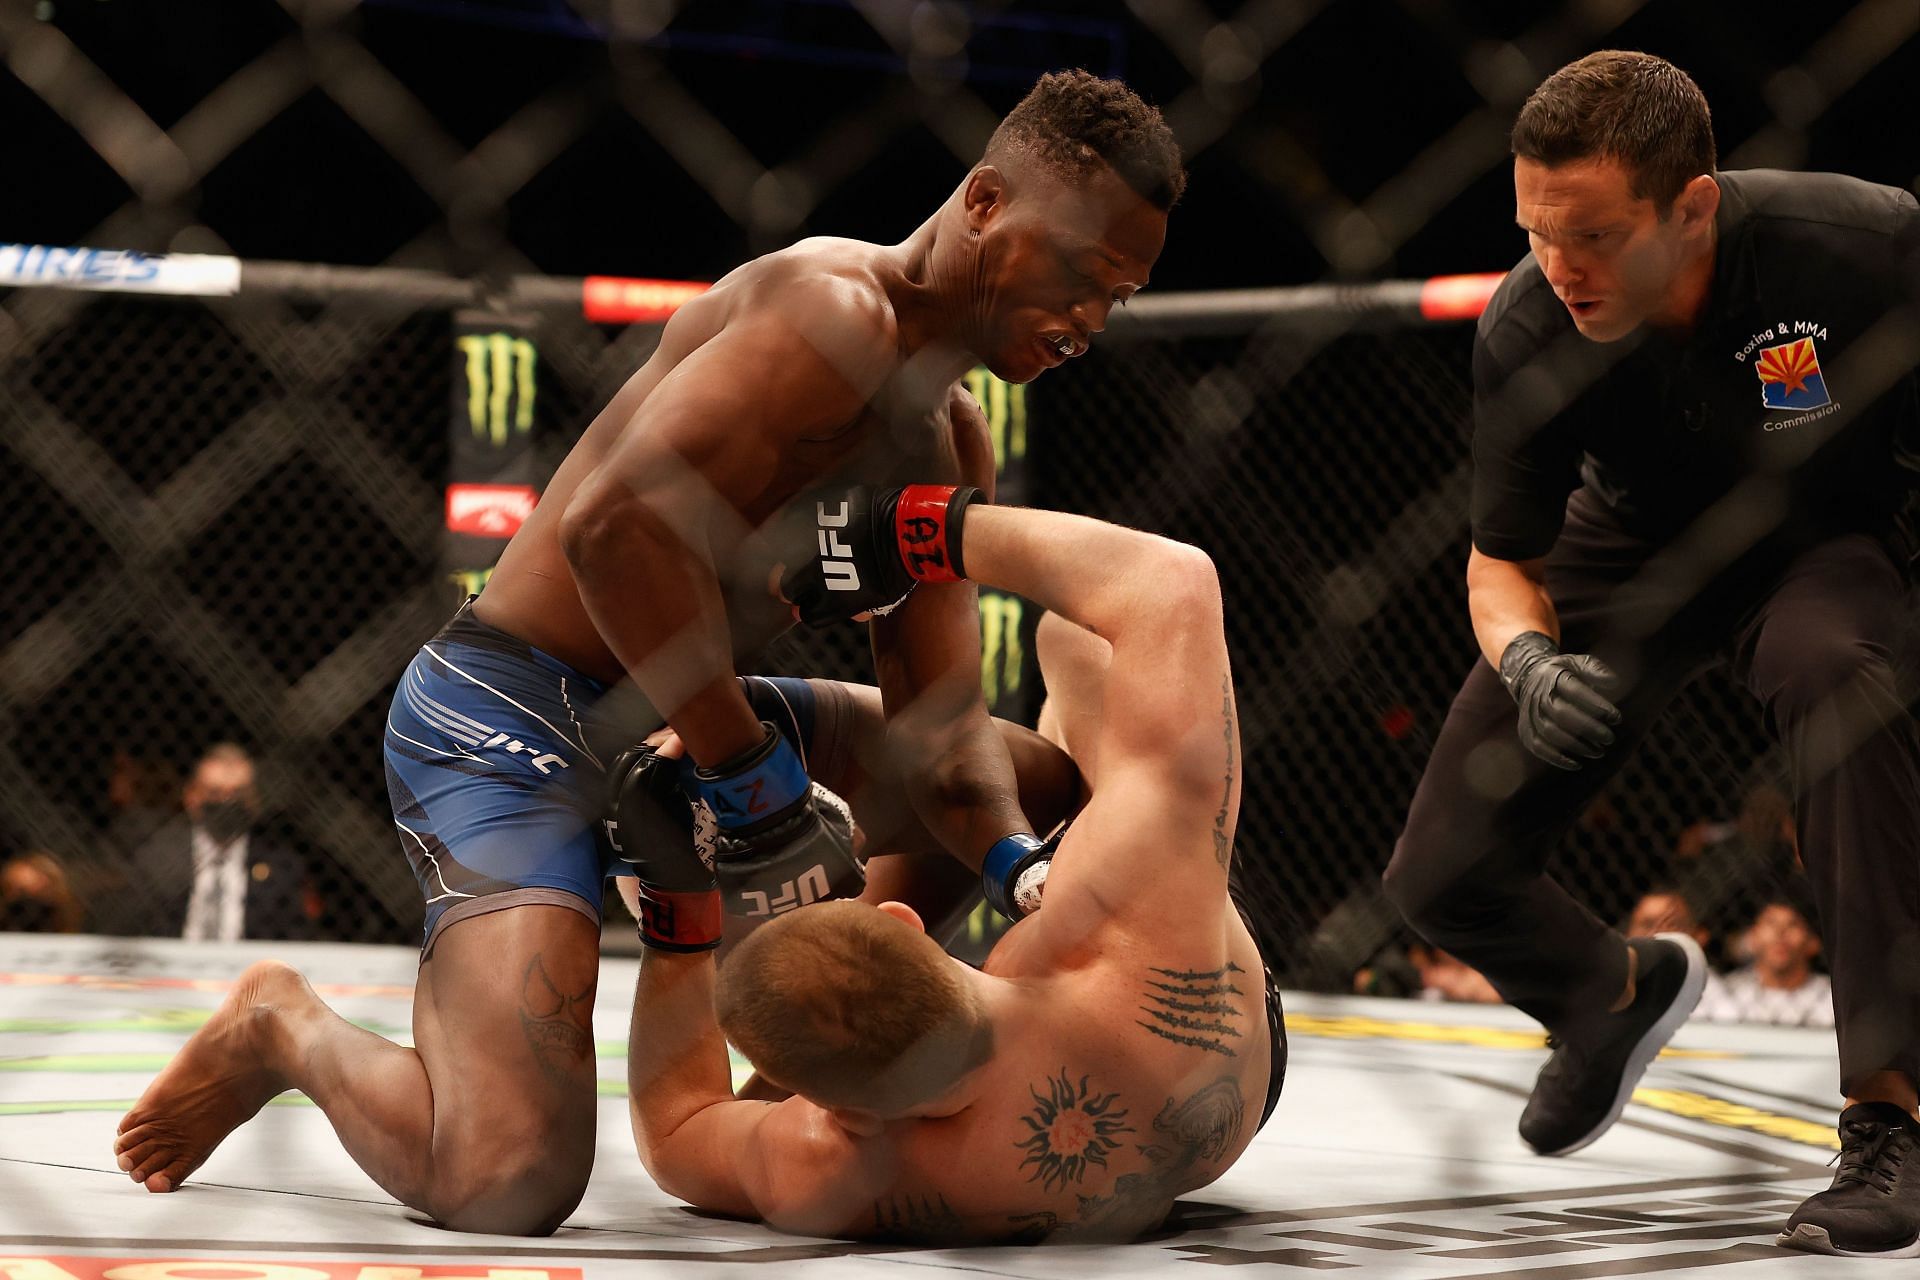 Terrance McKinney stunned everyone with his 7 second knockout of Matt Frevola